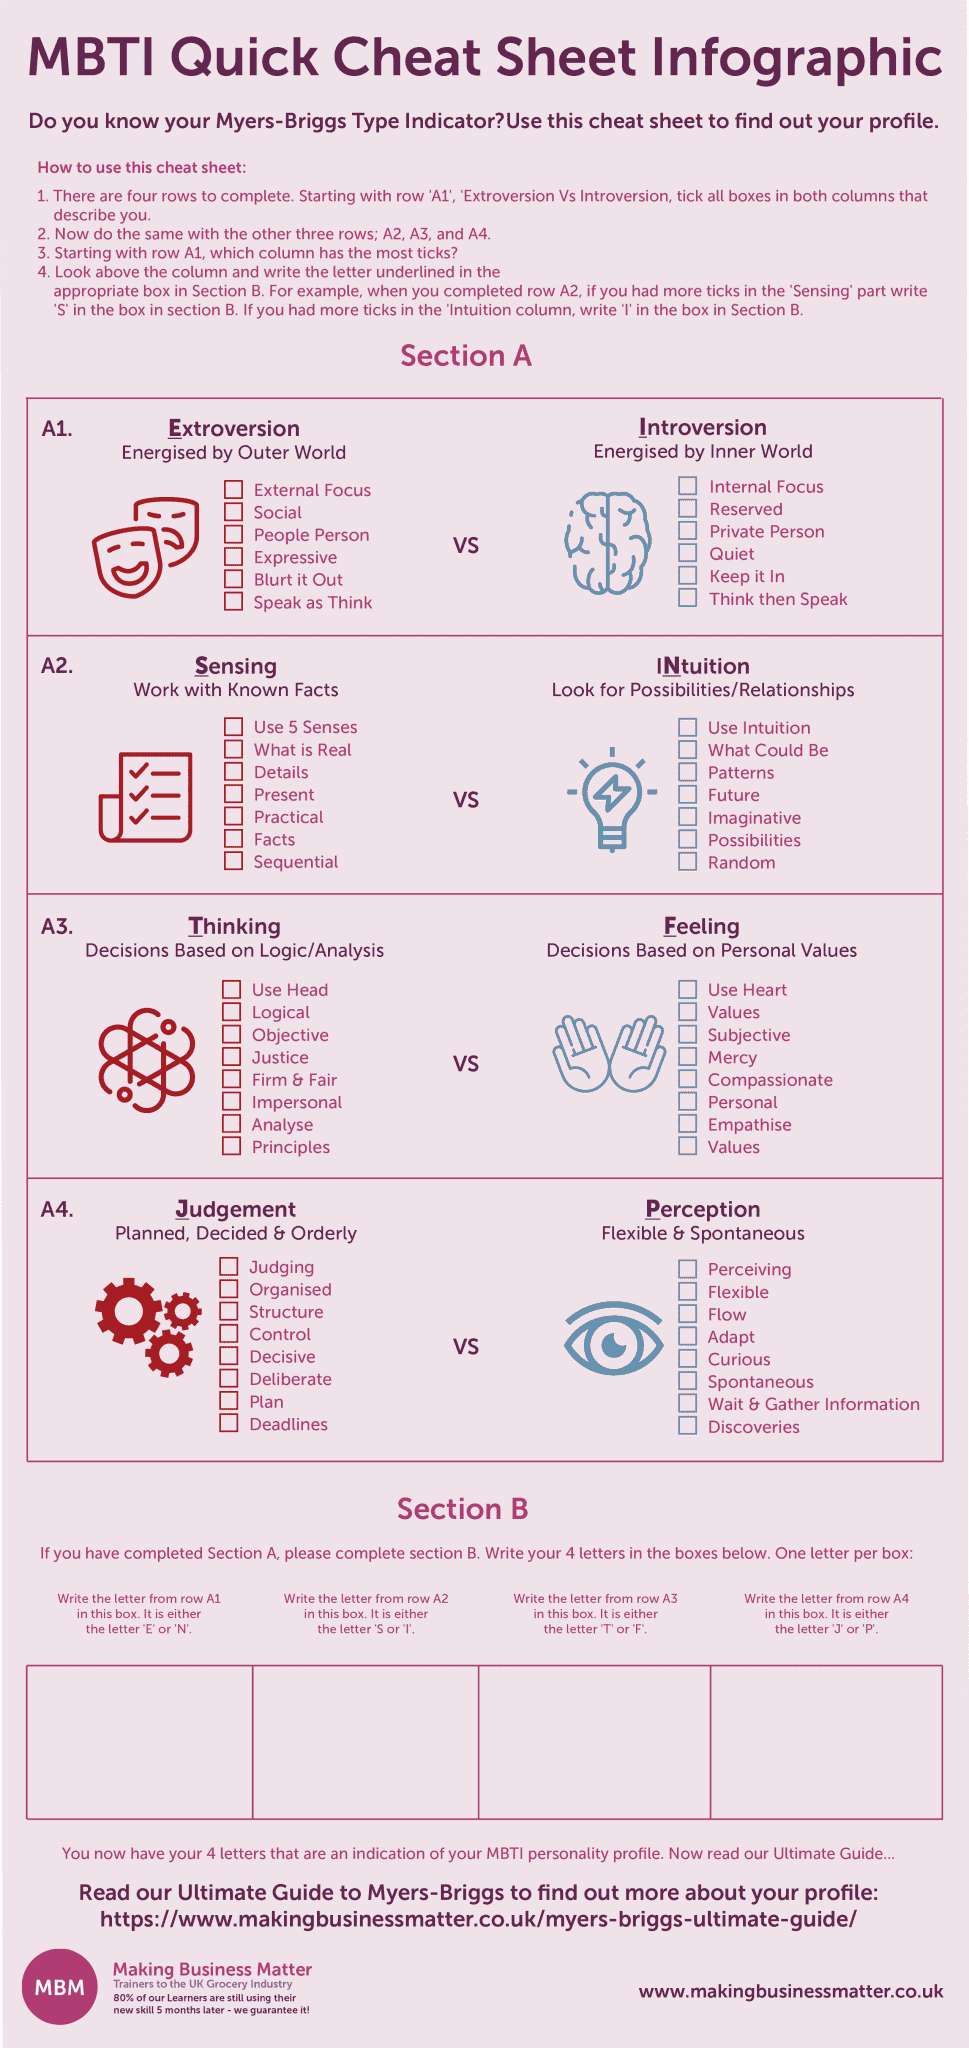 Infographic MBTI Quick Cheat Sheet for psychometric test to find out your personality profile